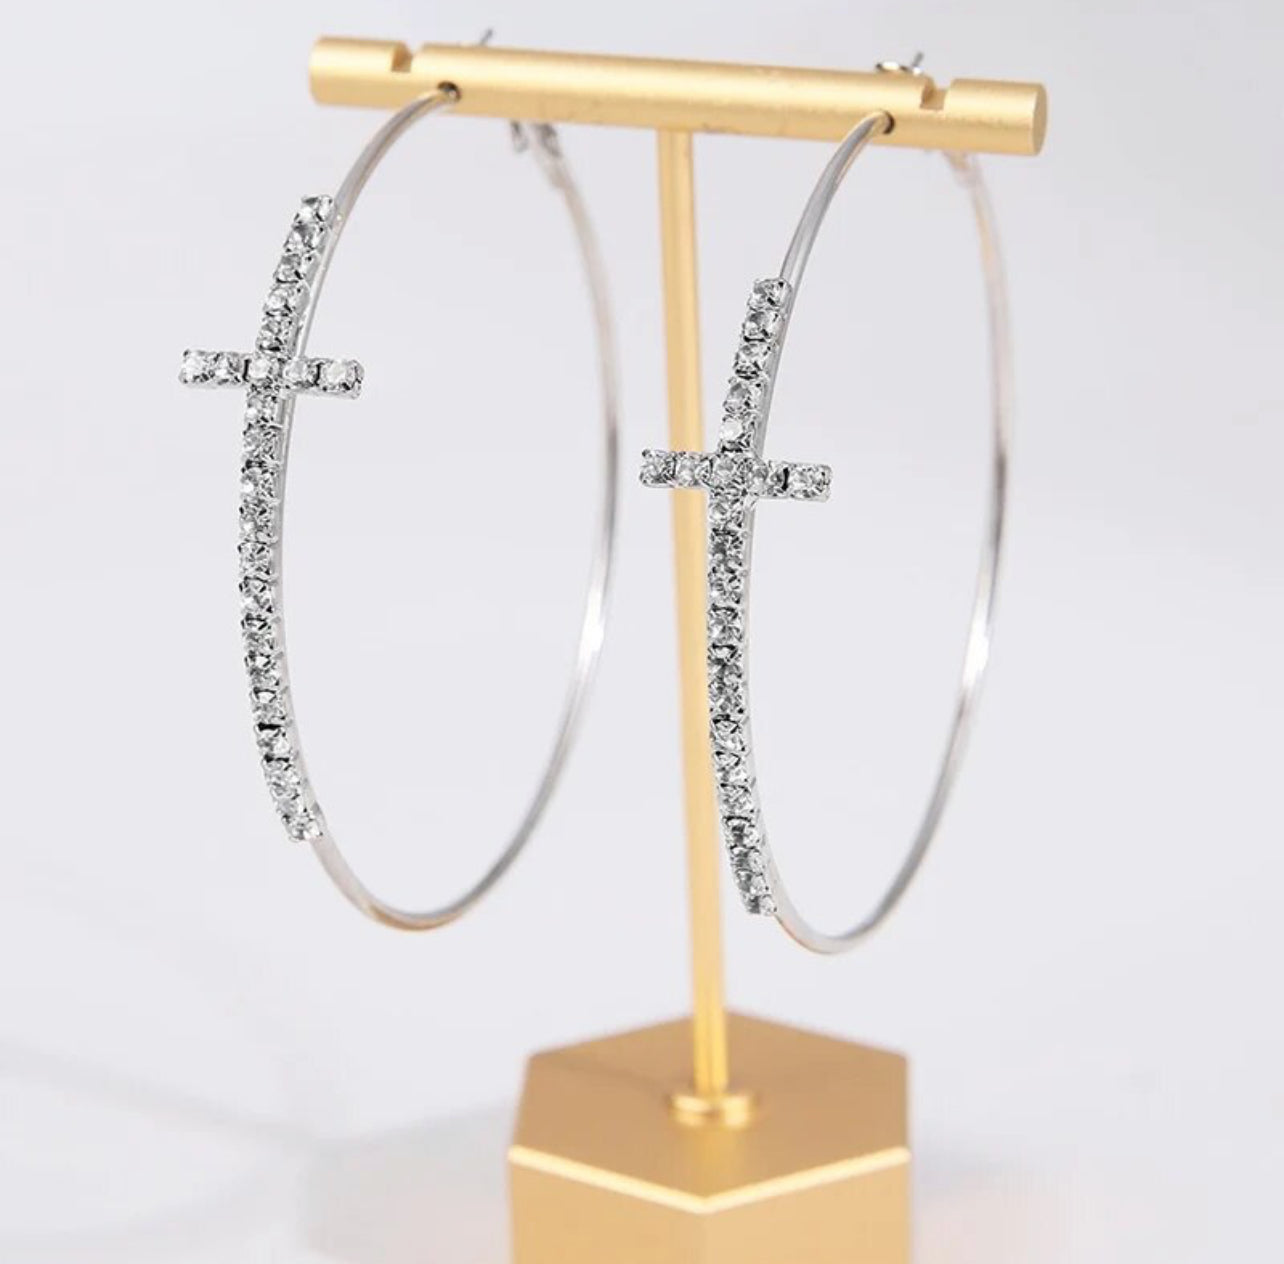 Gold Plated Cross Design Hoop Earrings with Shiny Rhinestone Inlay - Trendy Minimalist Style Jewelry for Women